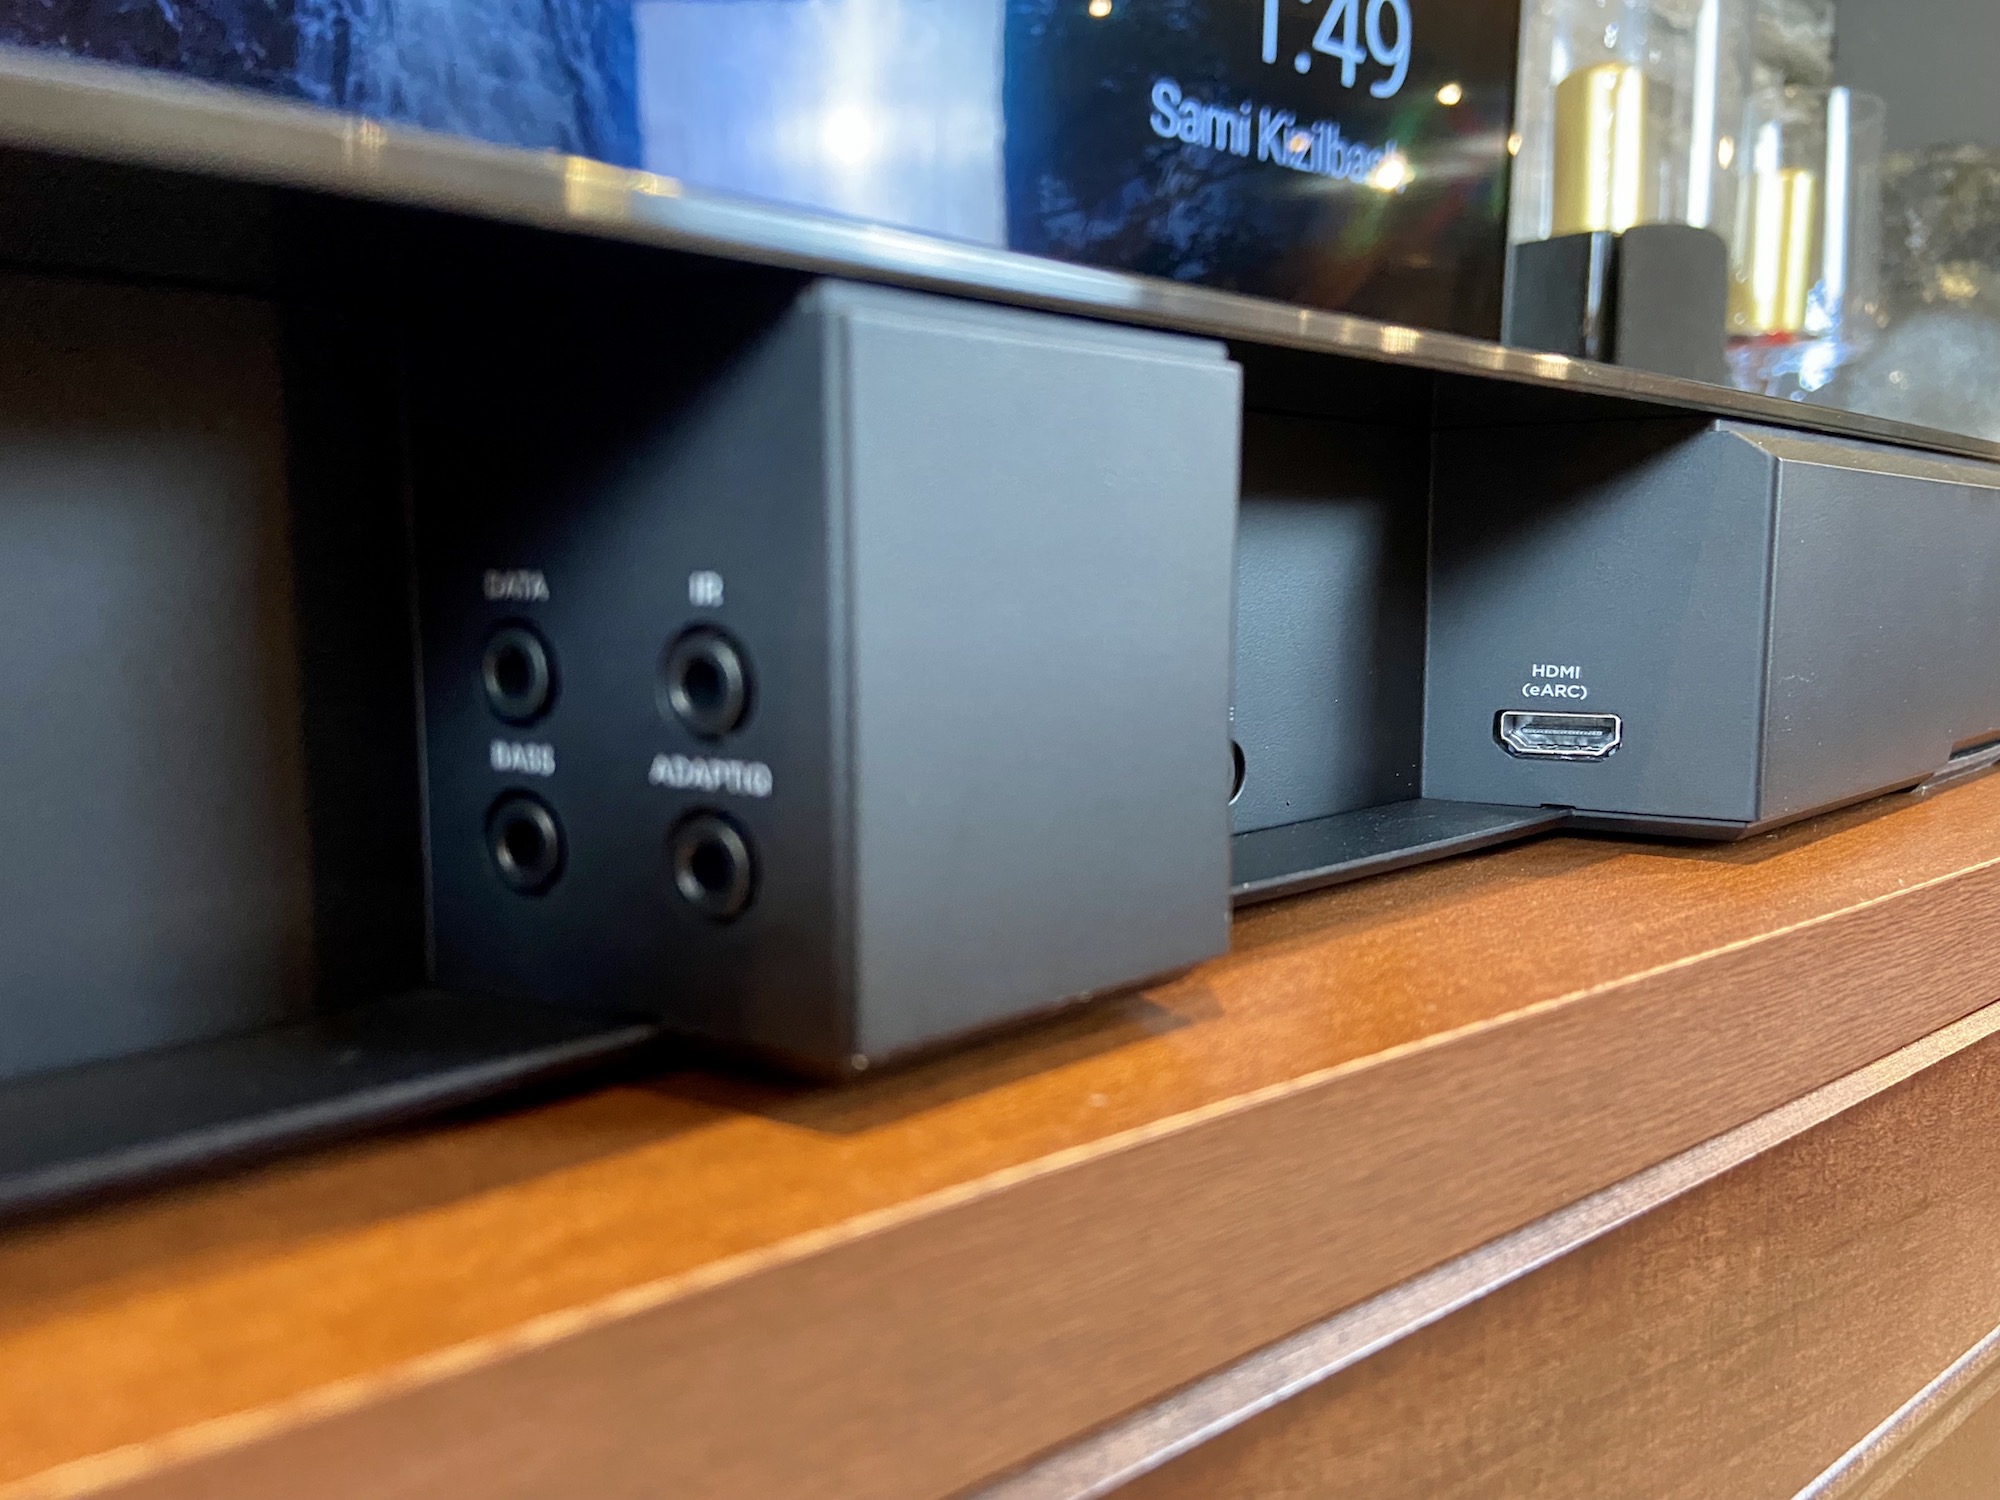 Bose Smart Soundbar 900 review: Atmos adds to the immersion